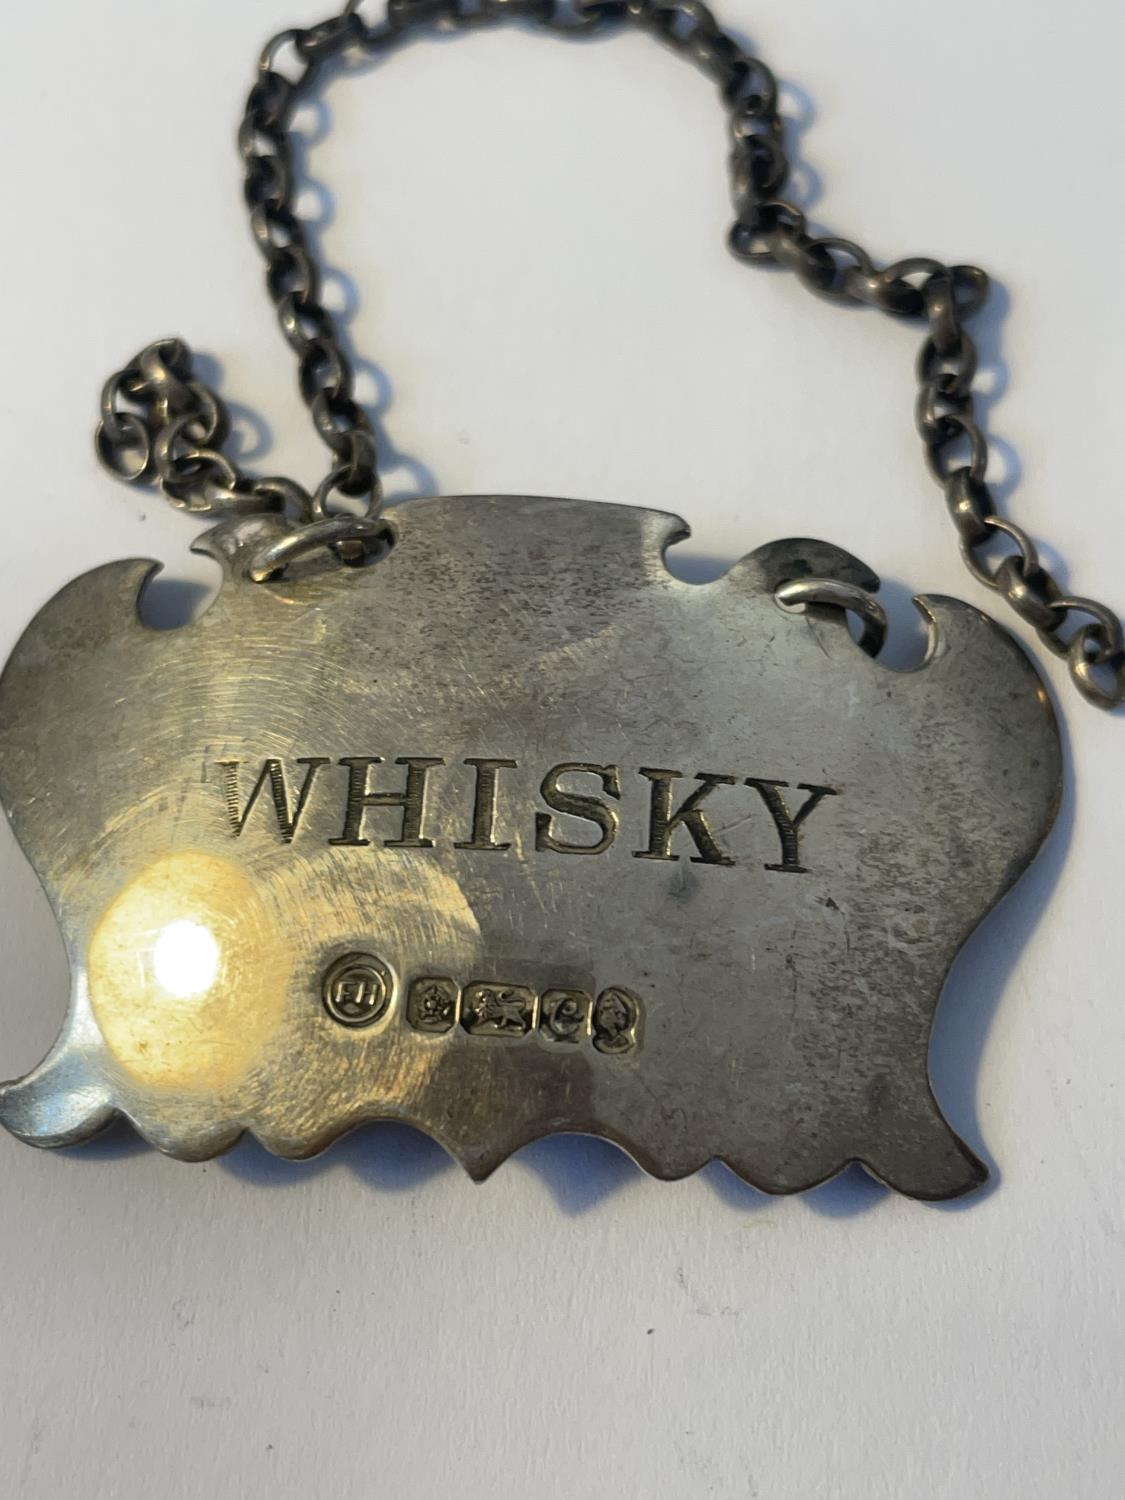 THREE HALLAMRKED SHEFFIELD SILVER DECANTER LABELS BRANDY, WHISKY AND GIN GROSS WEIGHT 44.5 GRAMS - Image 3 of 4